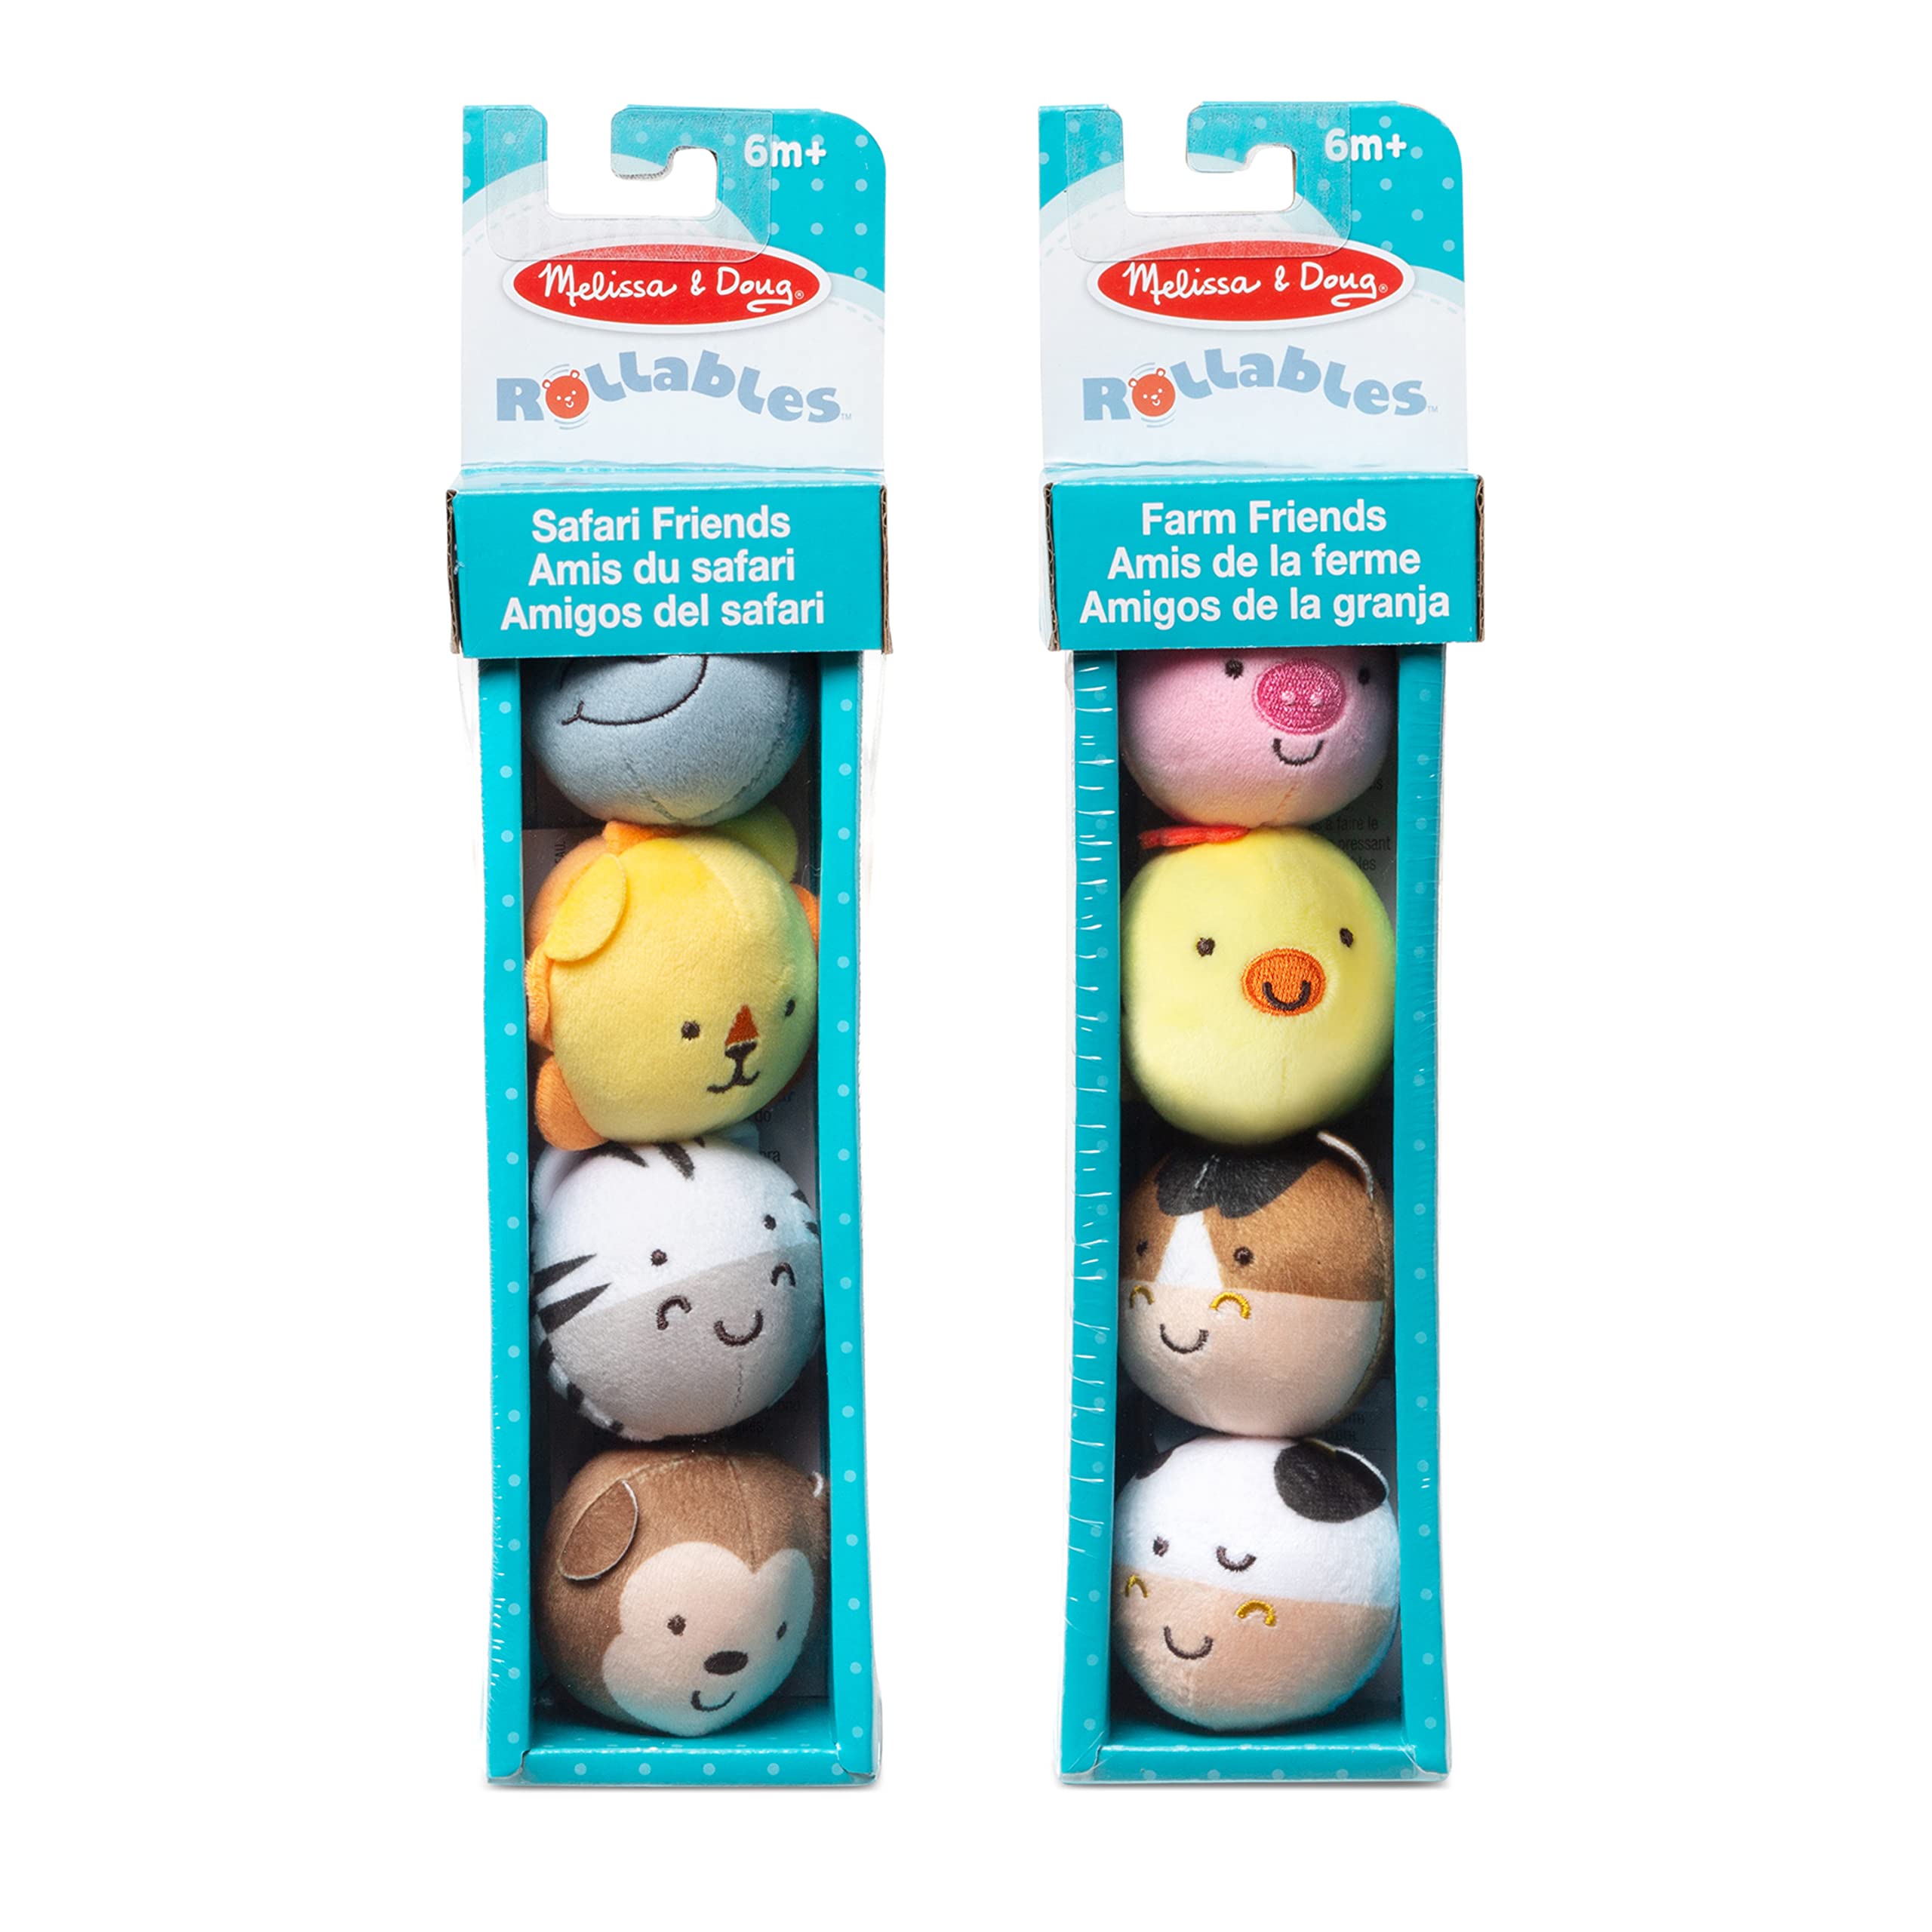 2-Pack Melissa & Doug Rollables Toy Set (Safari Friends & Farm Friends) $14.83 + Free Shipping w/ Prime or on $35+